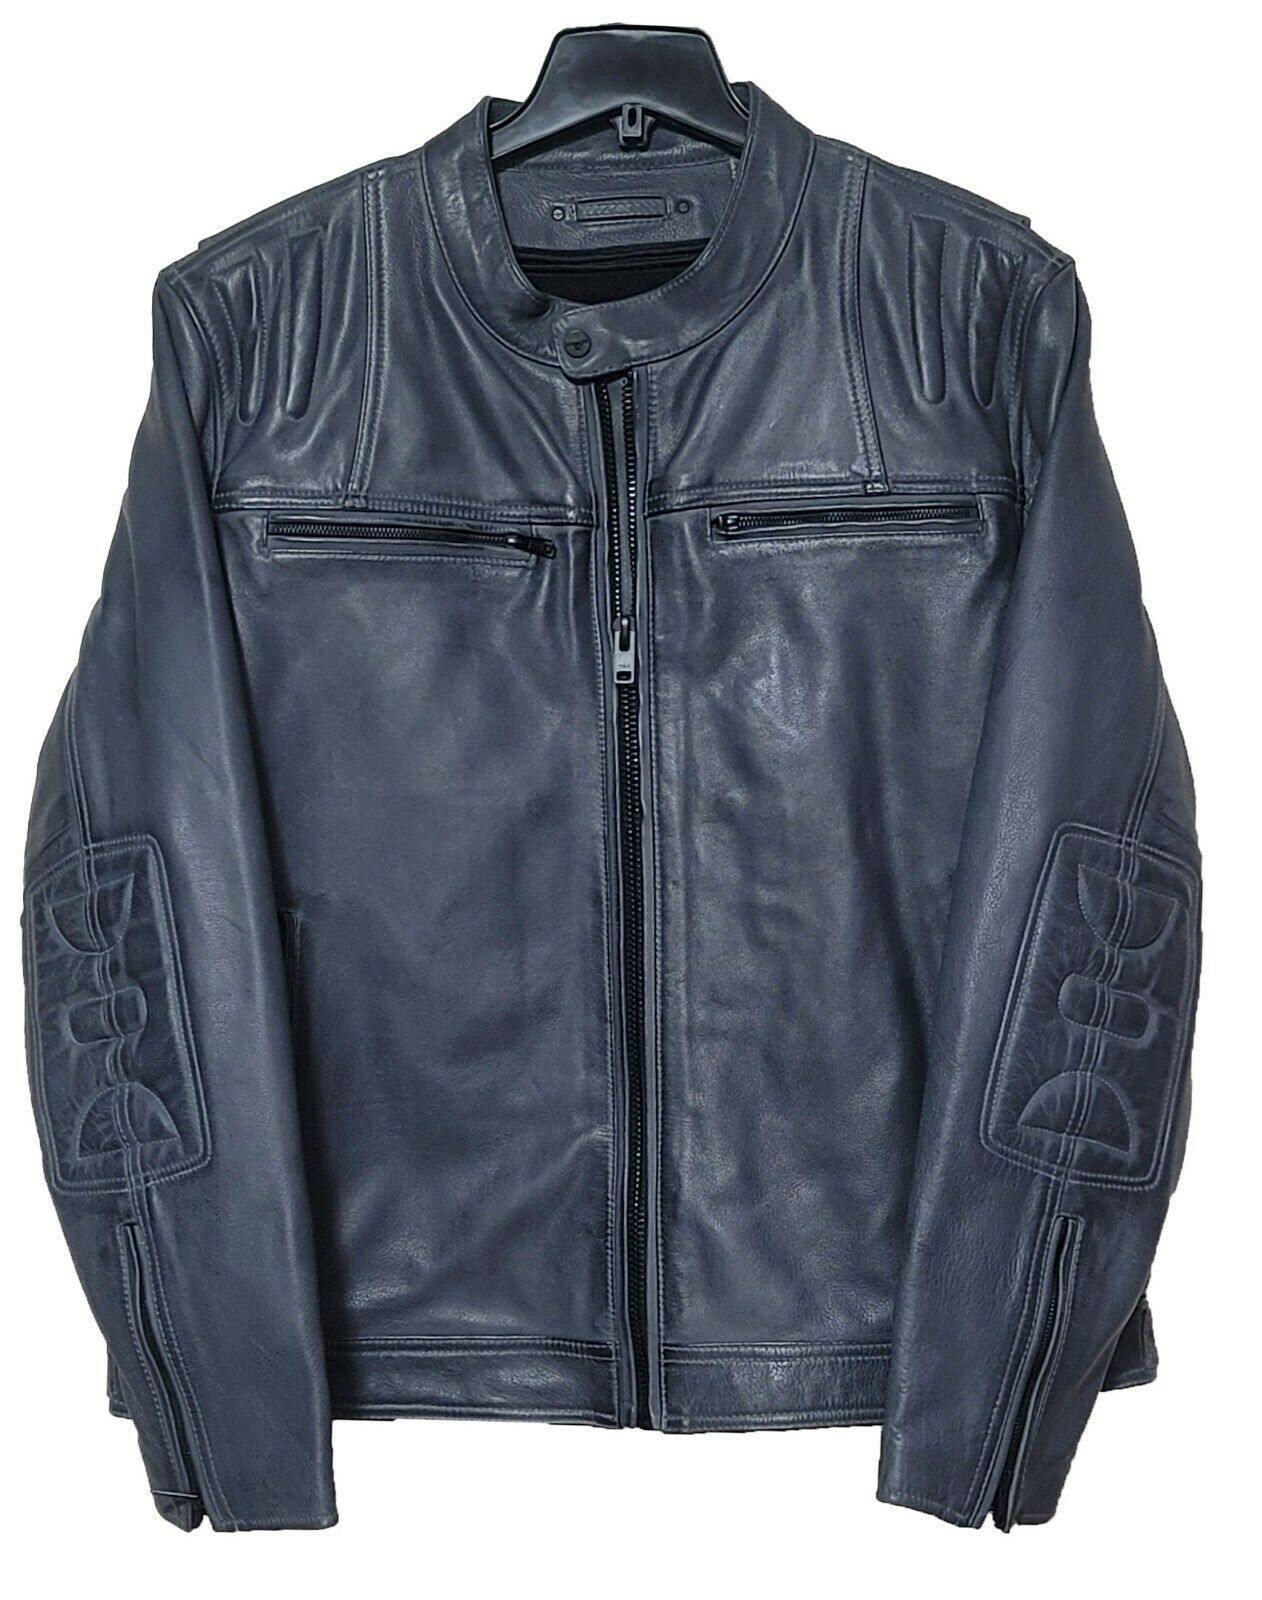 Wilsons Leather Mens Genuine Leather Performance Motorcycle Jacket W/Padding XXL - SVNYFancy